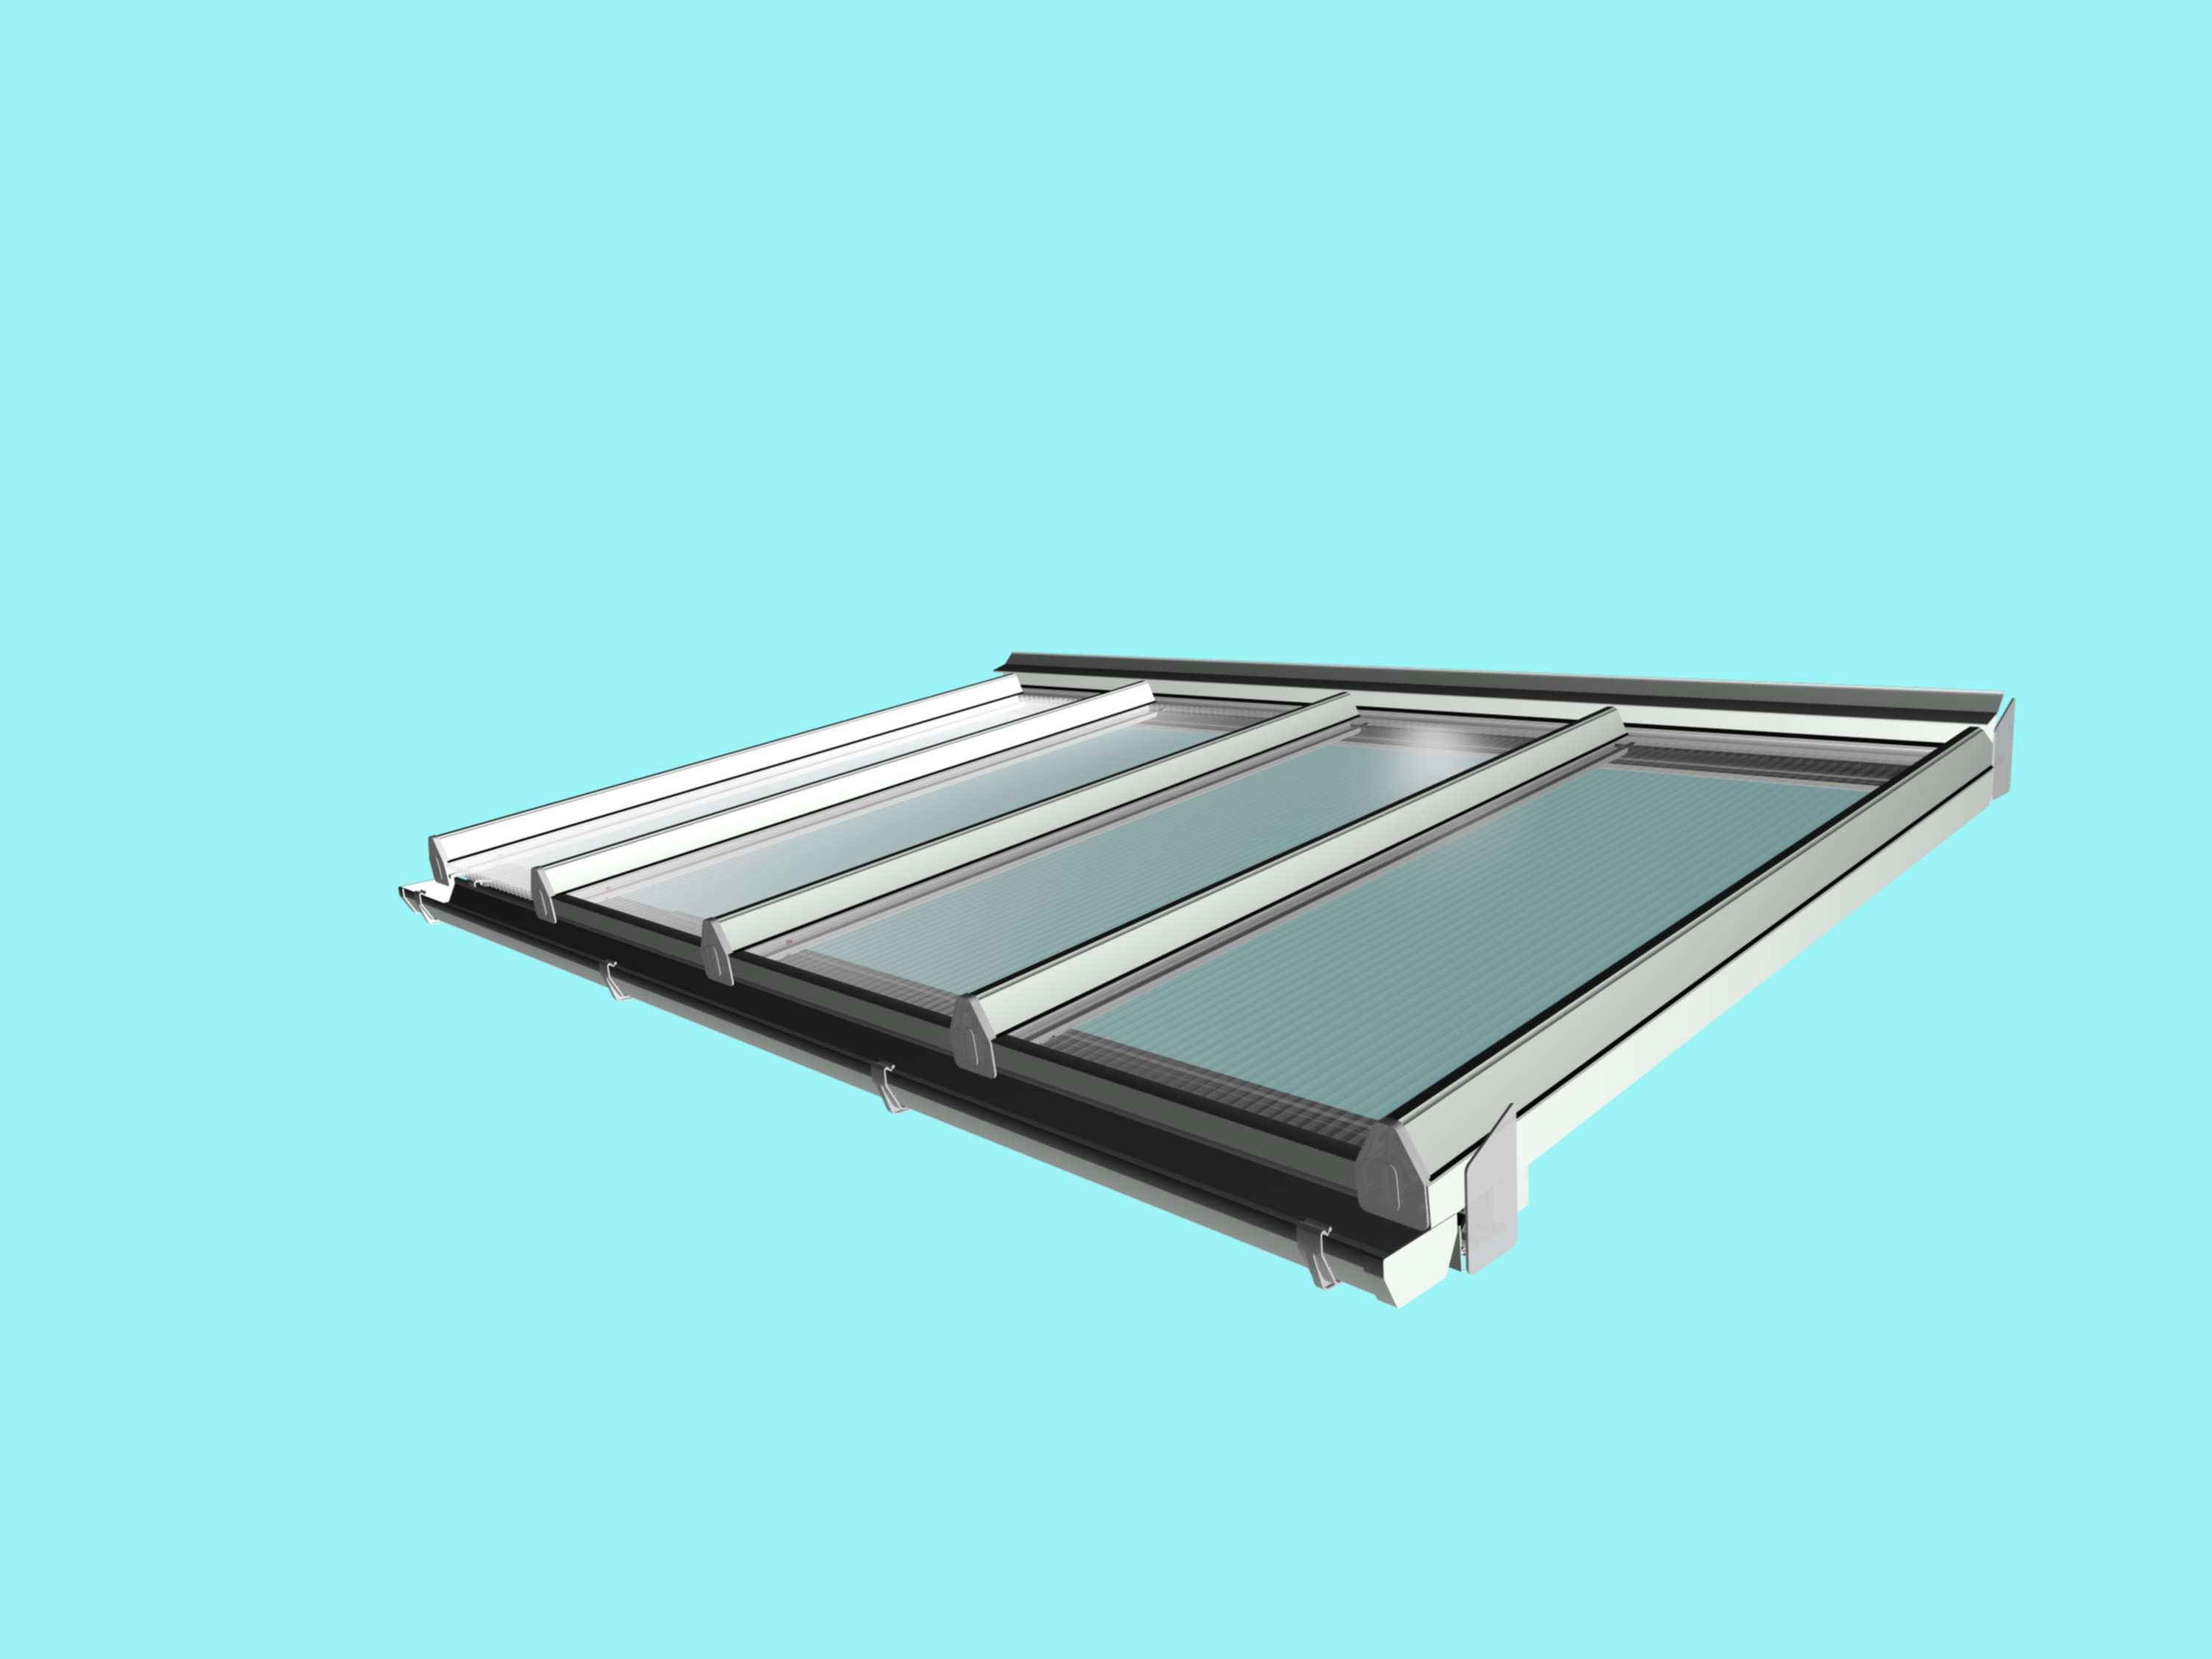 Self-Supporting DIY Conservatory Roof Kit for 16mm polycarbonate, 3.0m wide x 3.0m Projection from Omega Build